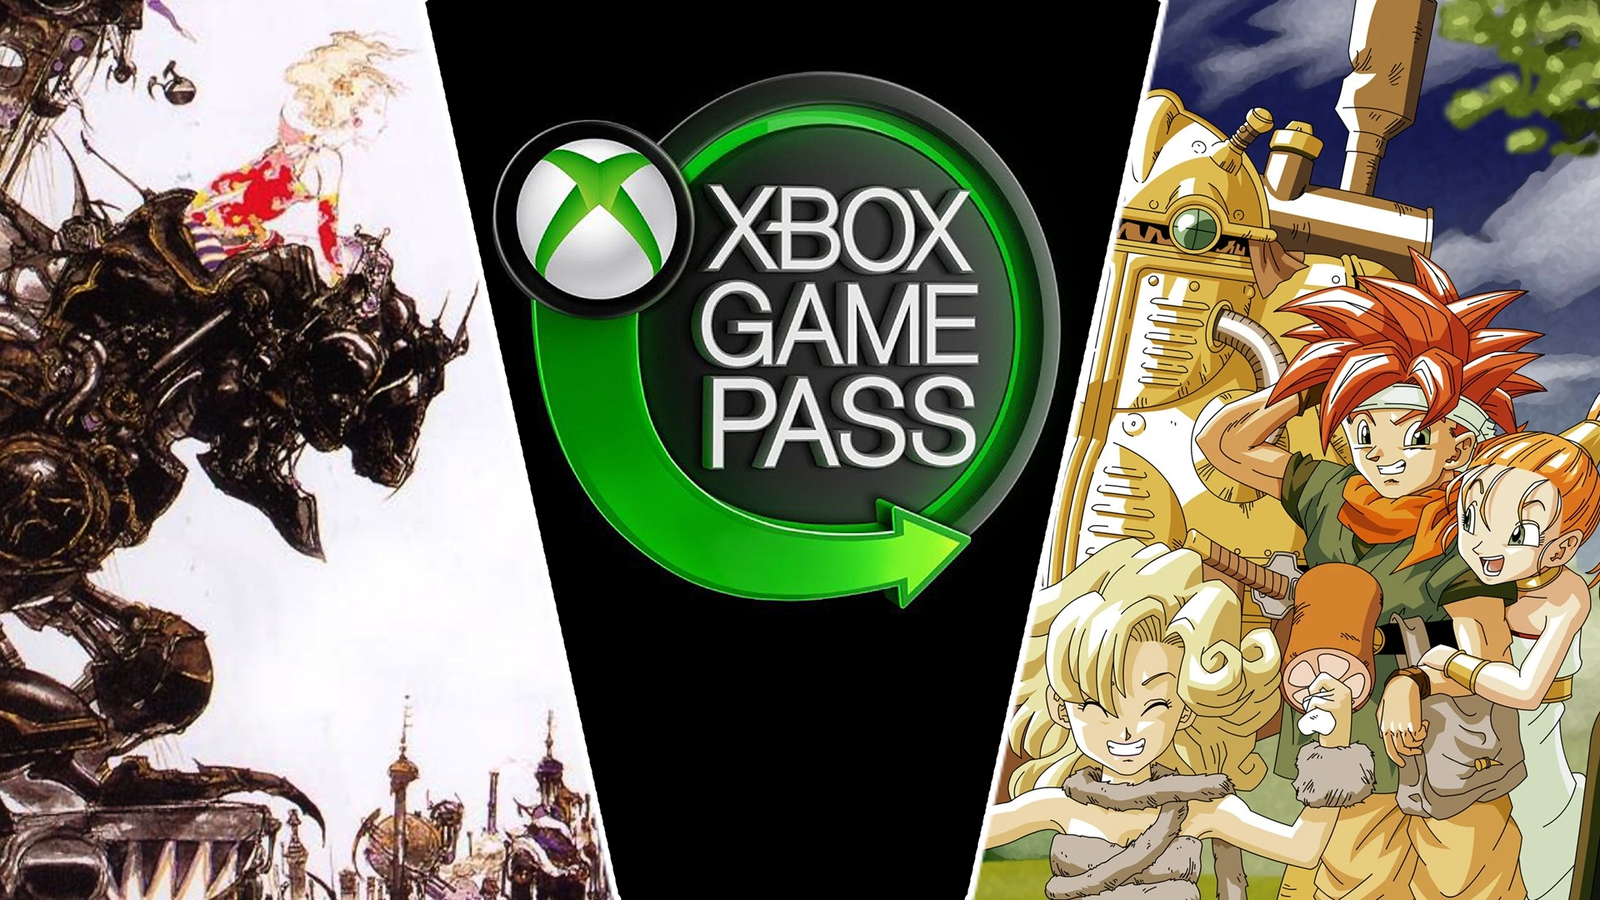 The Final Fantasy series is coming to Xbox Game Pass - The Verge